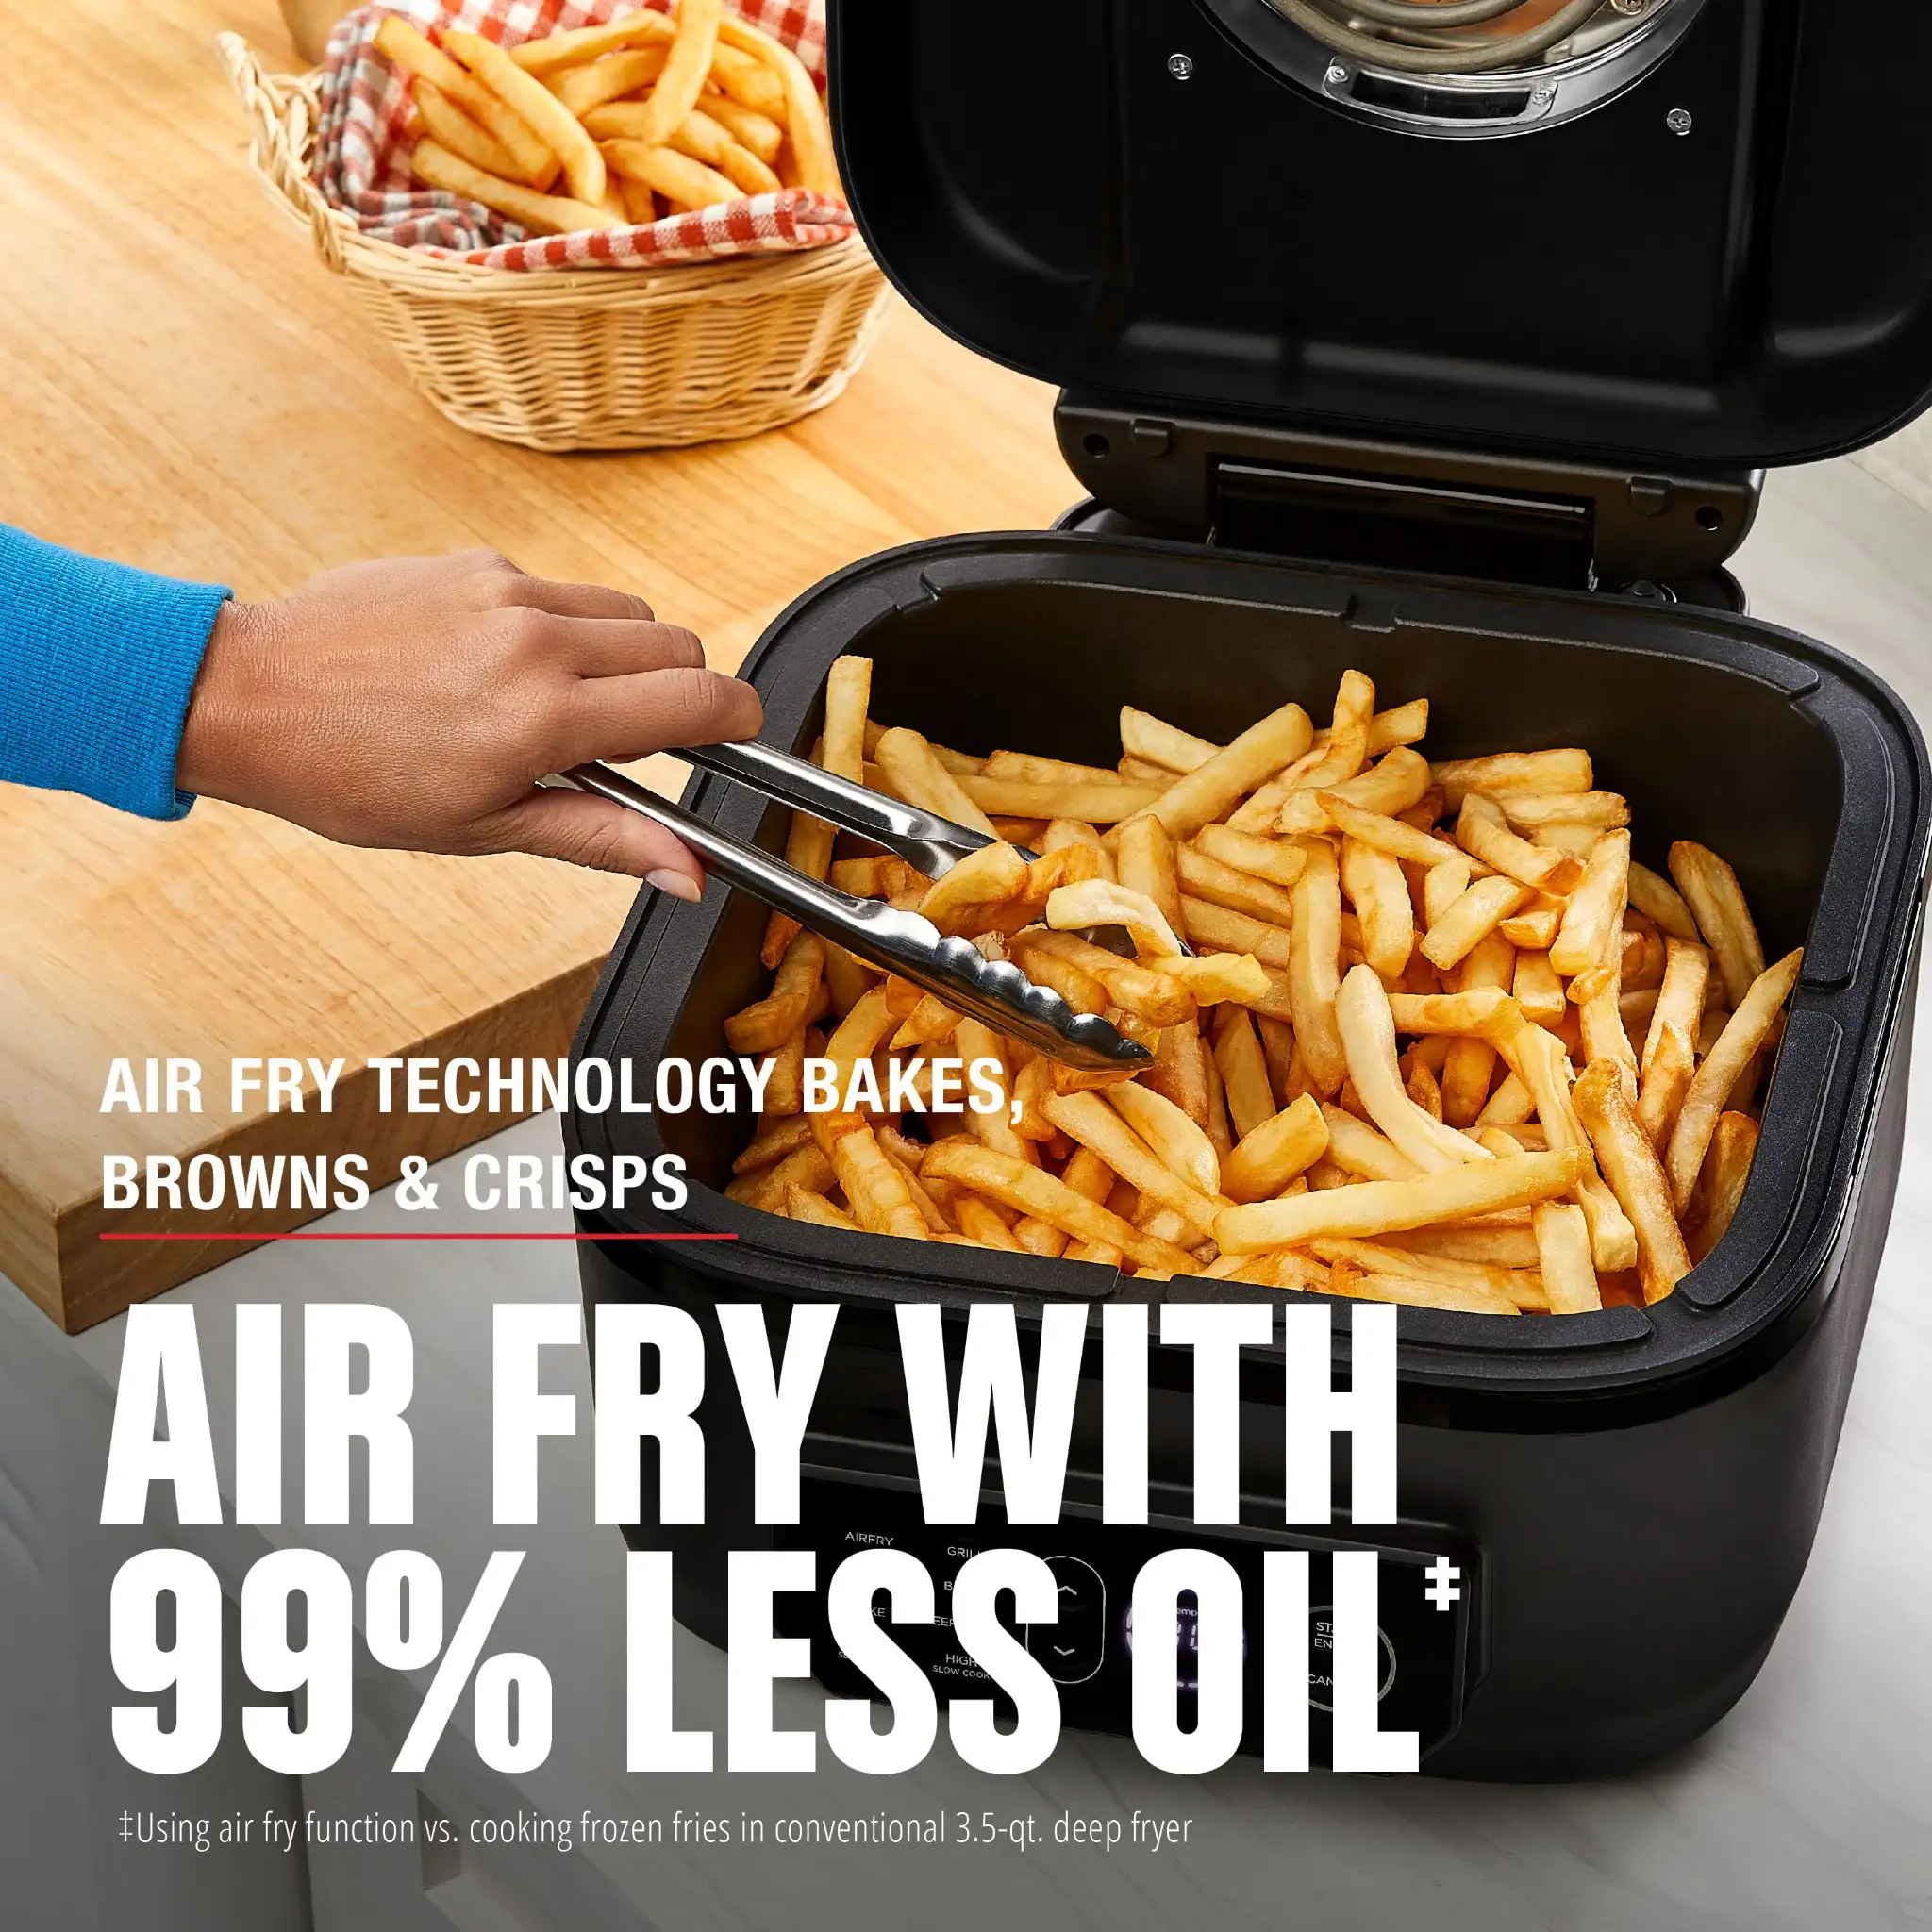 Beyond Grill 7-in-1 Electric Indoor Grill and Air Fryer, Black, MCAFD800D enlarge